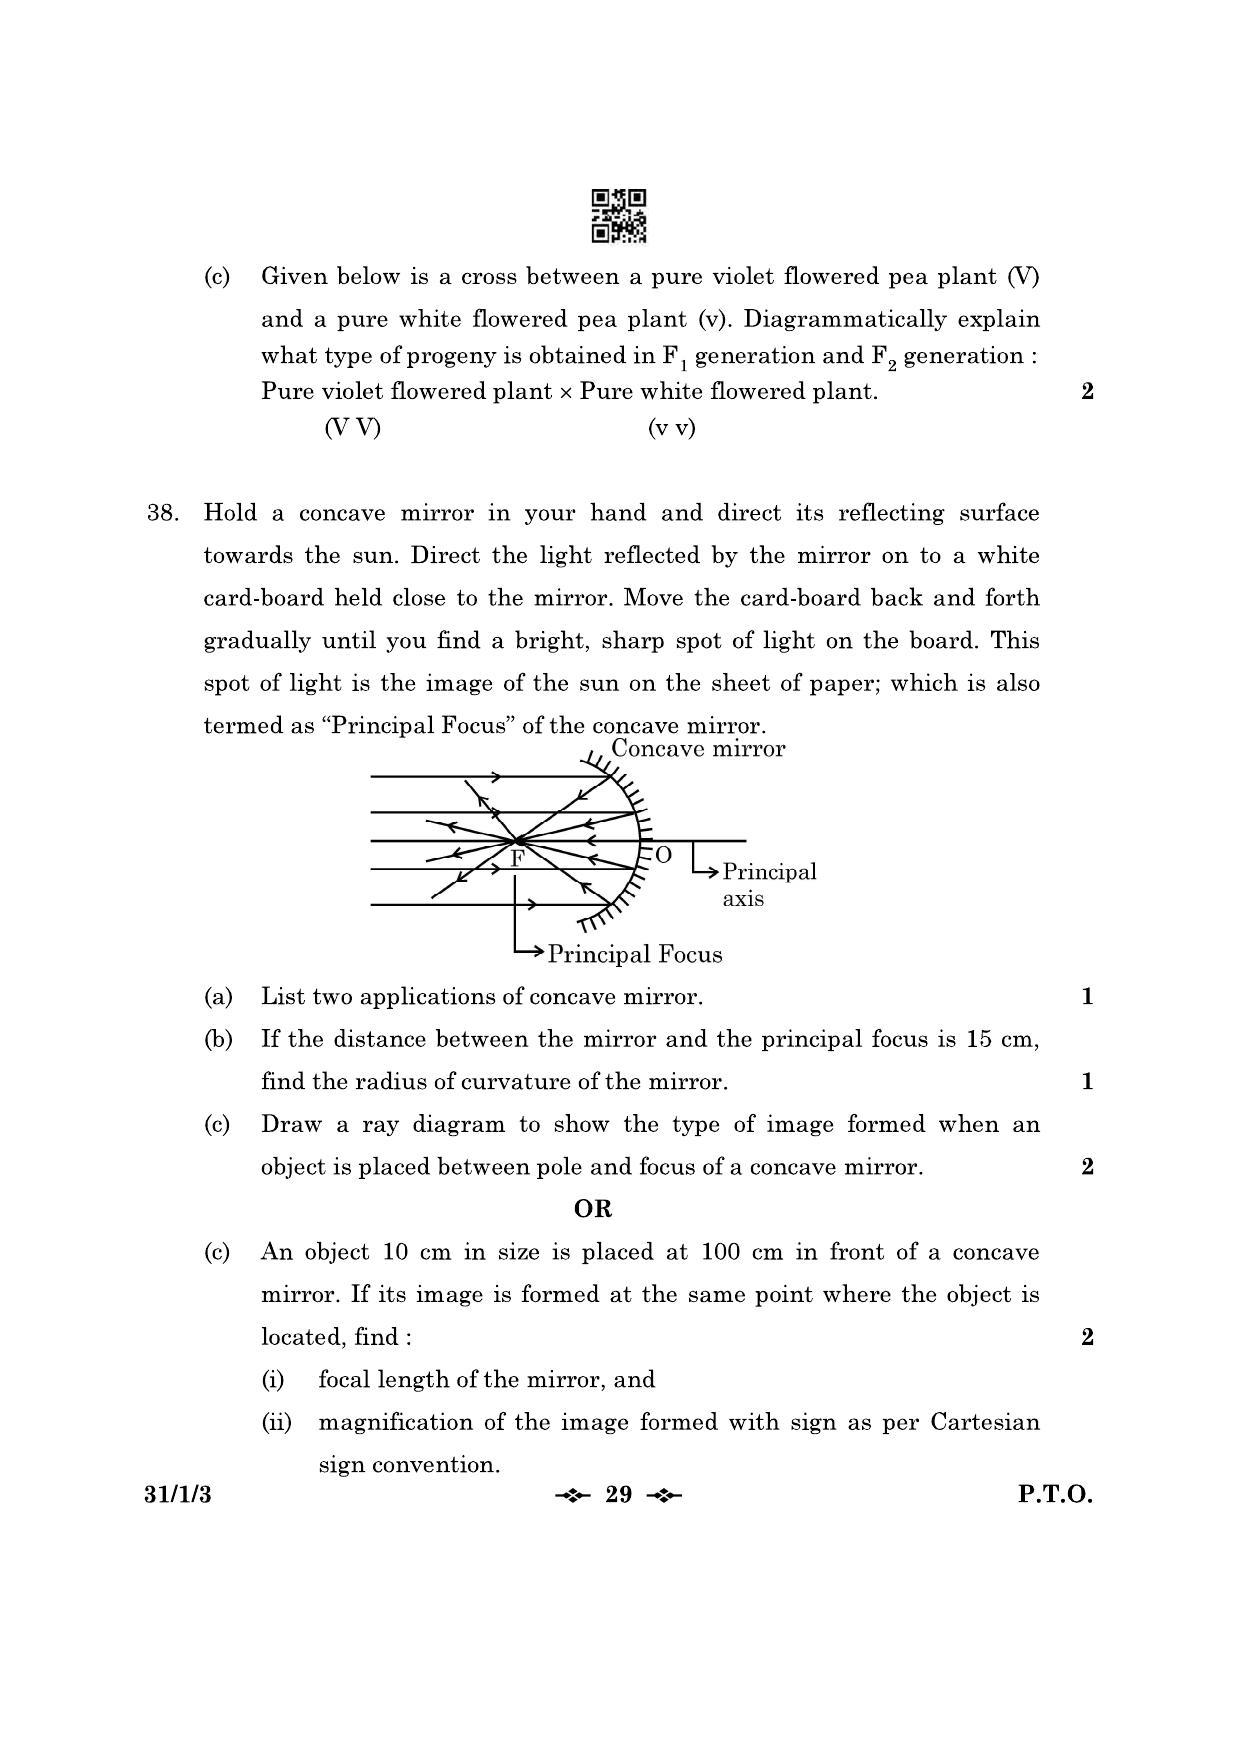 CBSE Class 10 31-1-3 Science 2023 Question Paper - Page 29